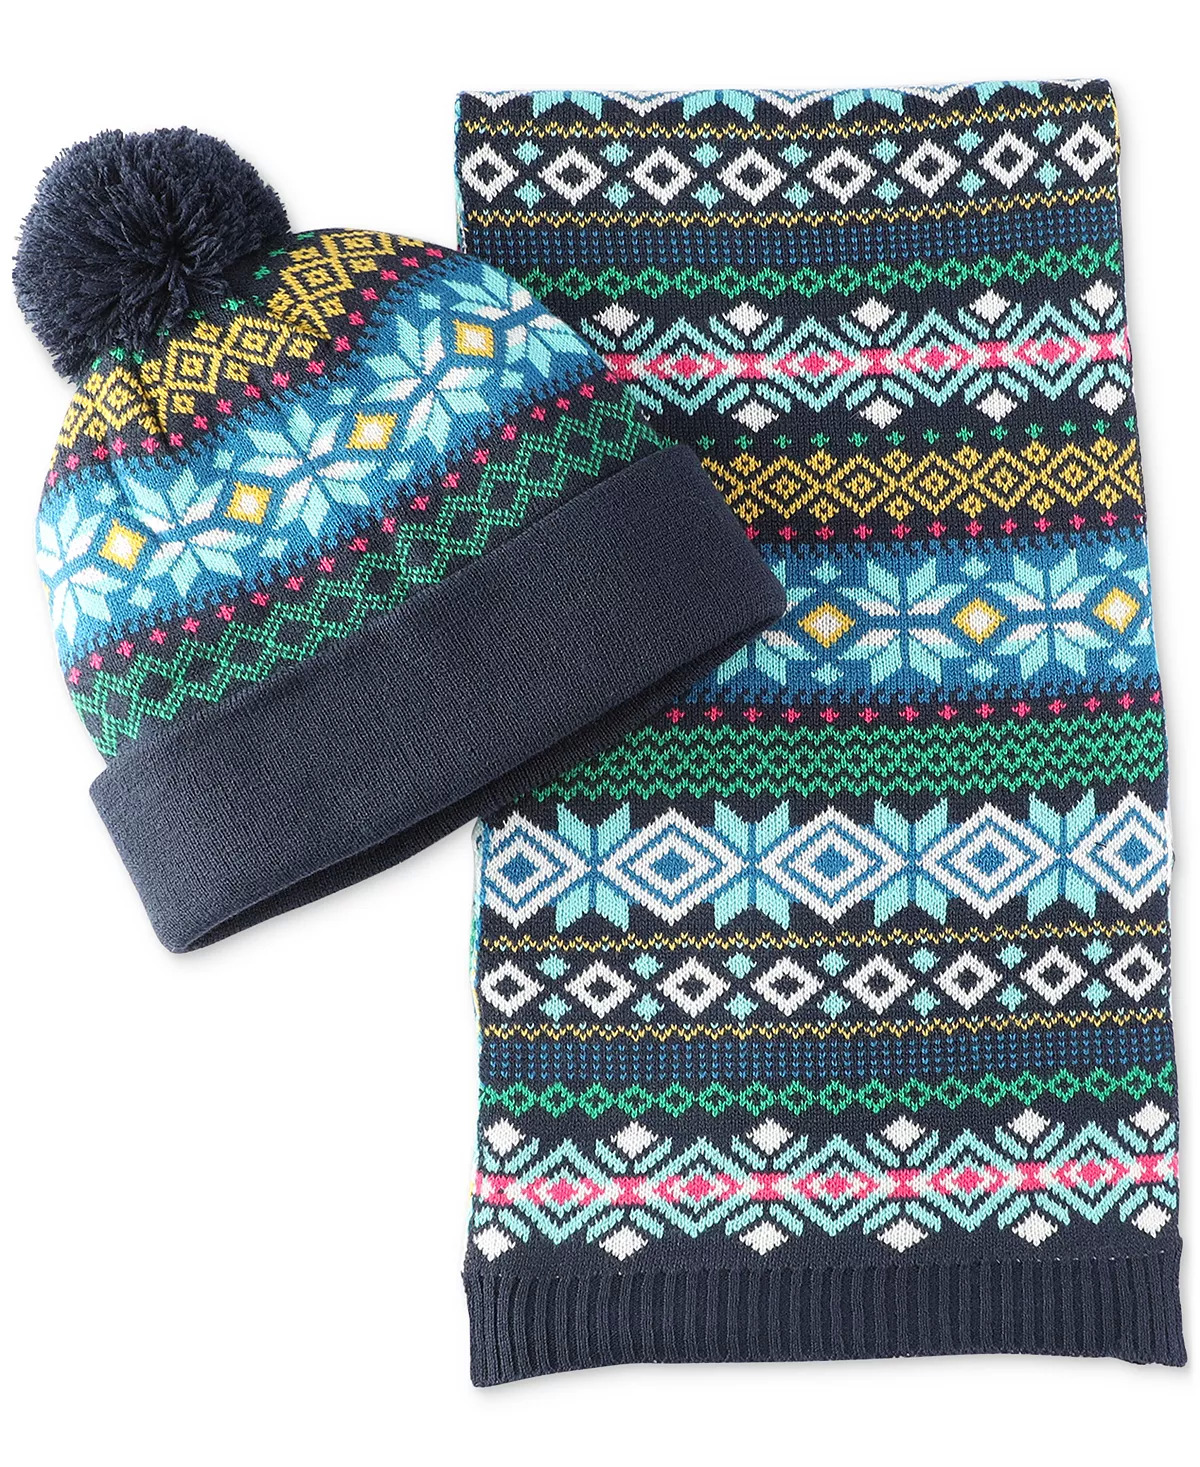 Club Room Men's Beanie & Scarf Set (Various Colors) $10 + Free Store Pickup at Macy's or Free Shipping on $25+